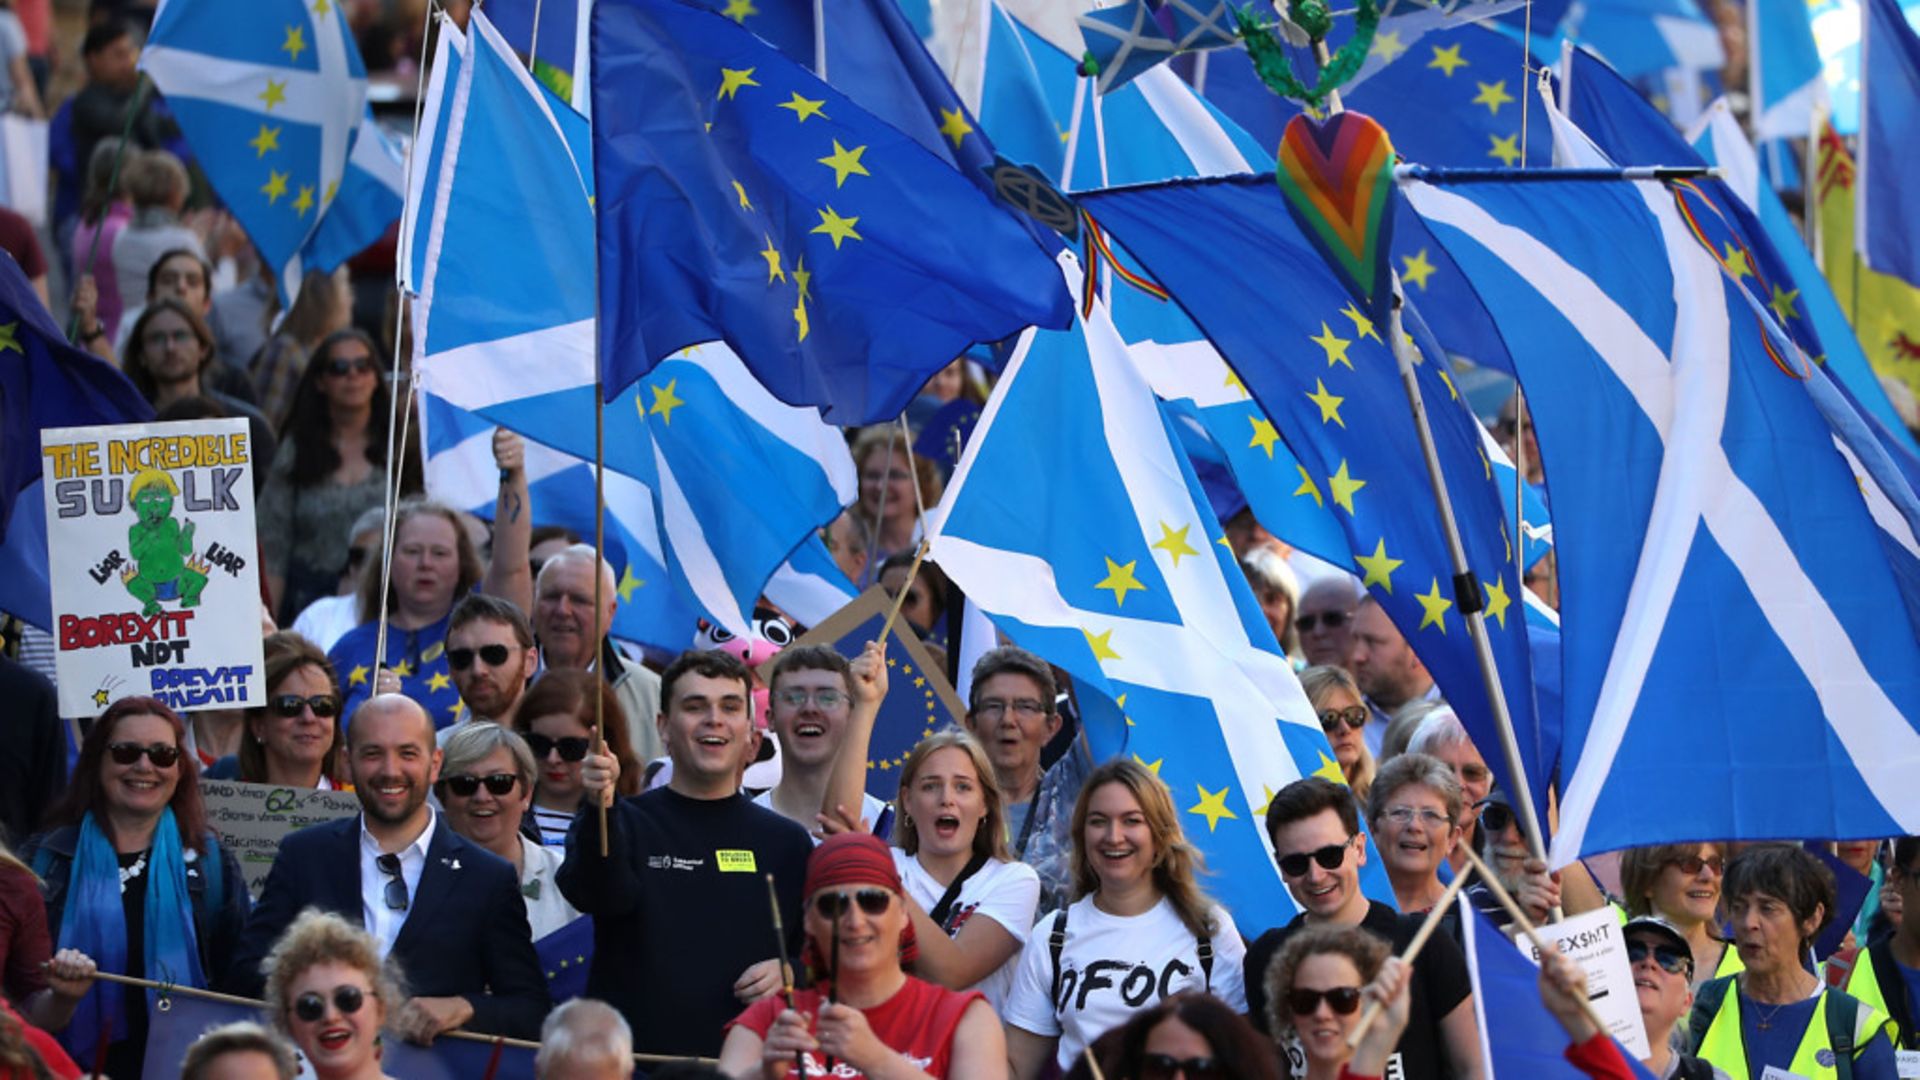 Pro-Europeans on a march in Scotland - Credit: PA